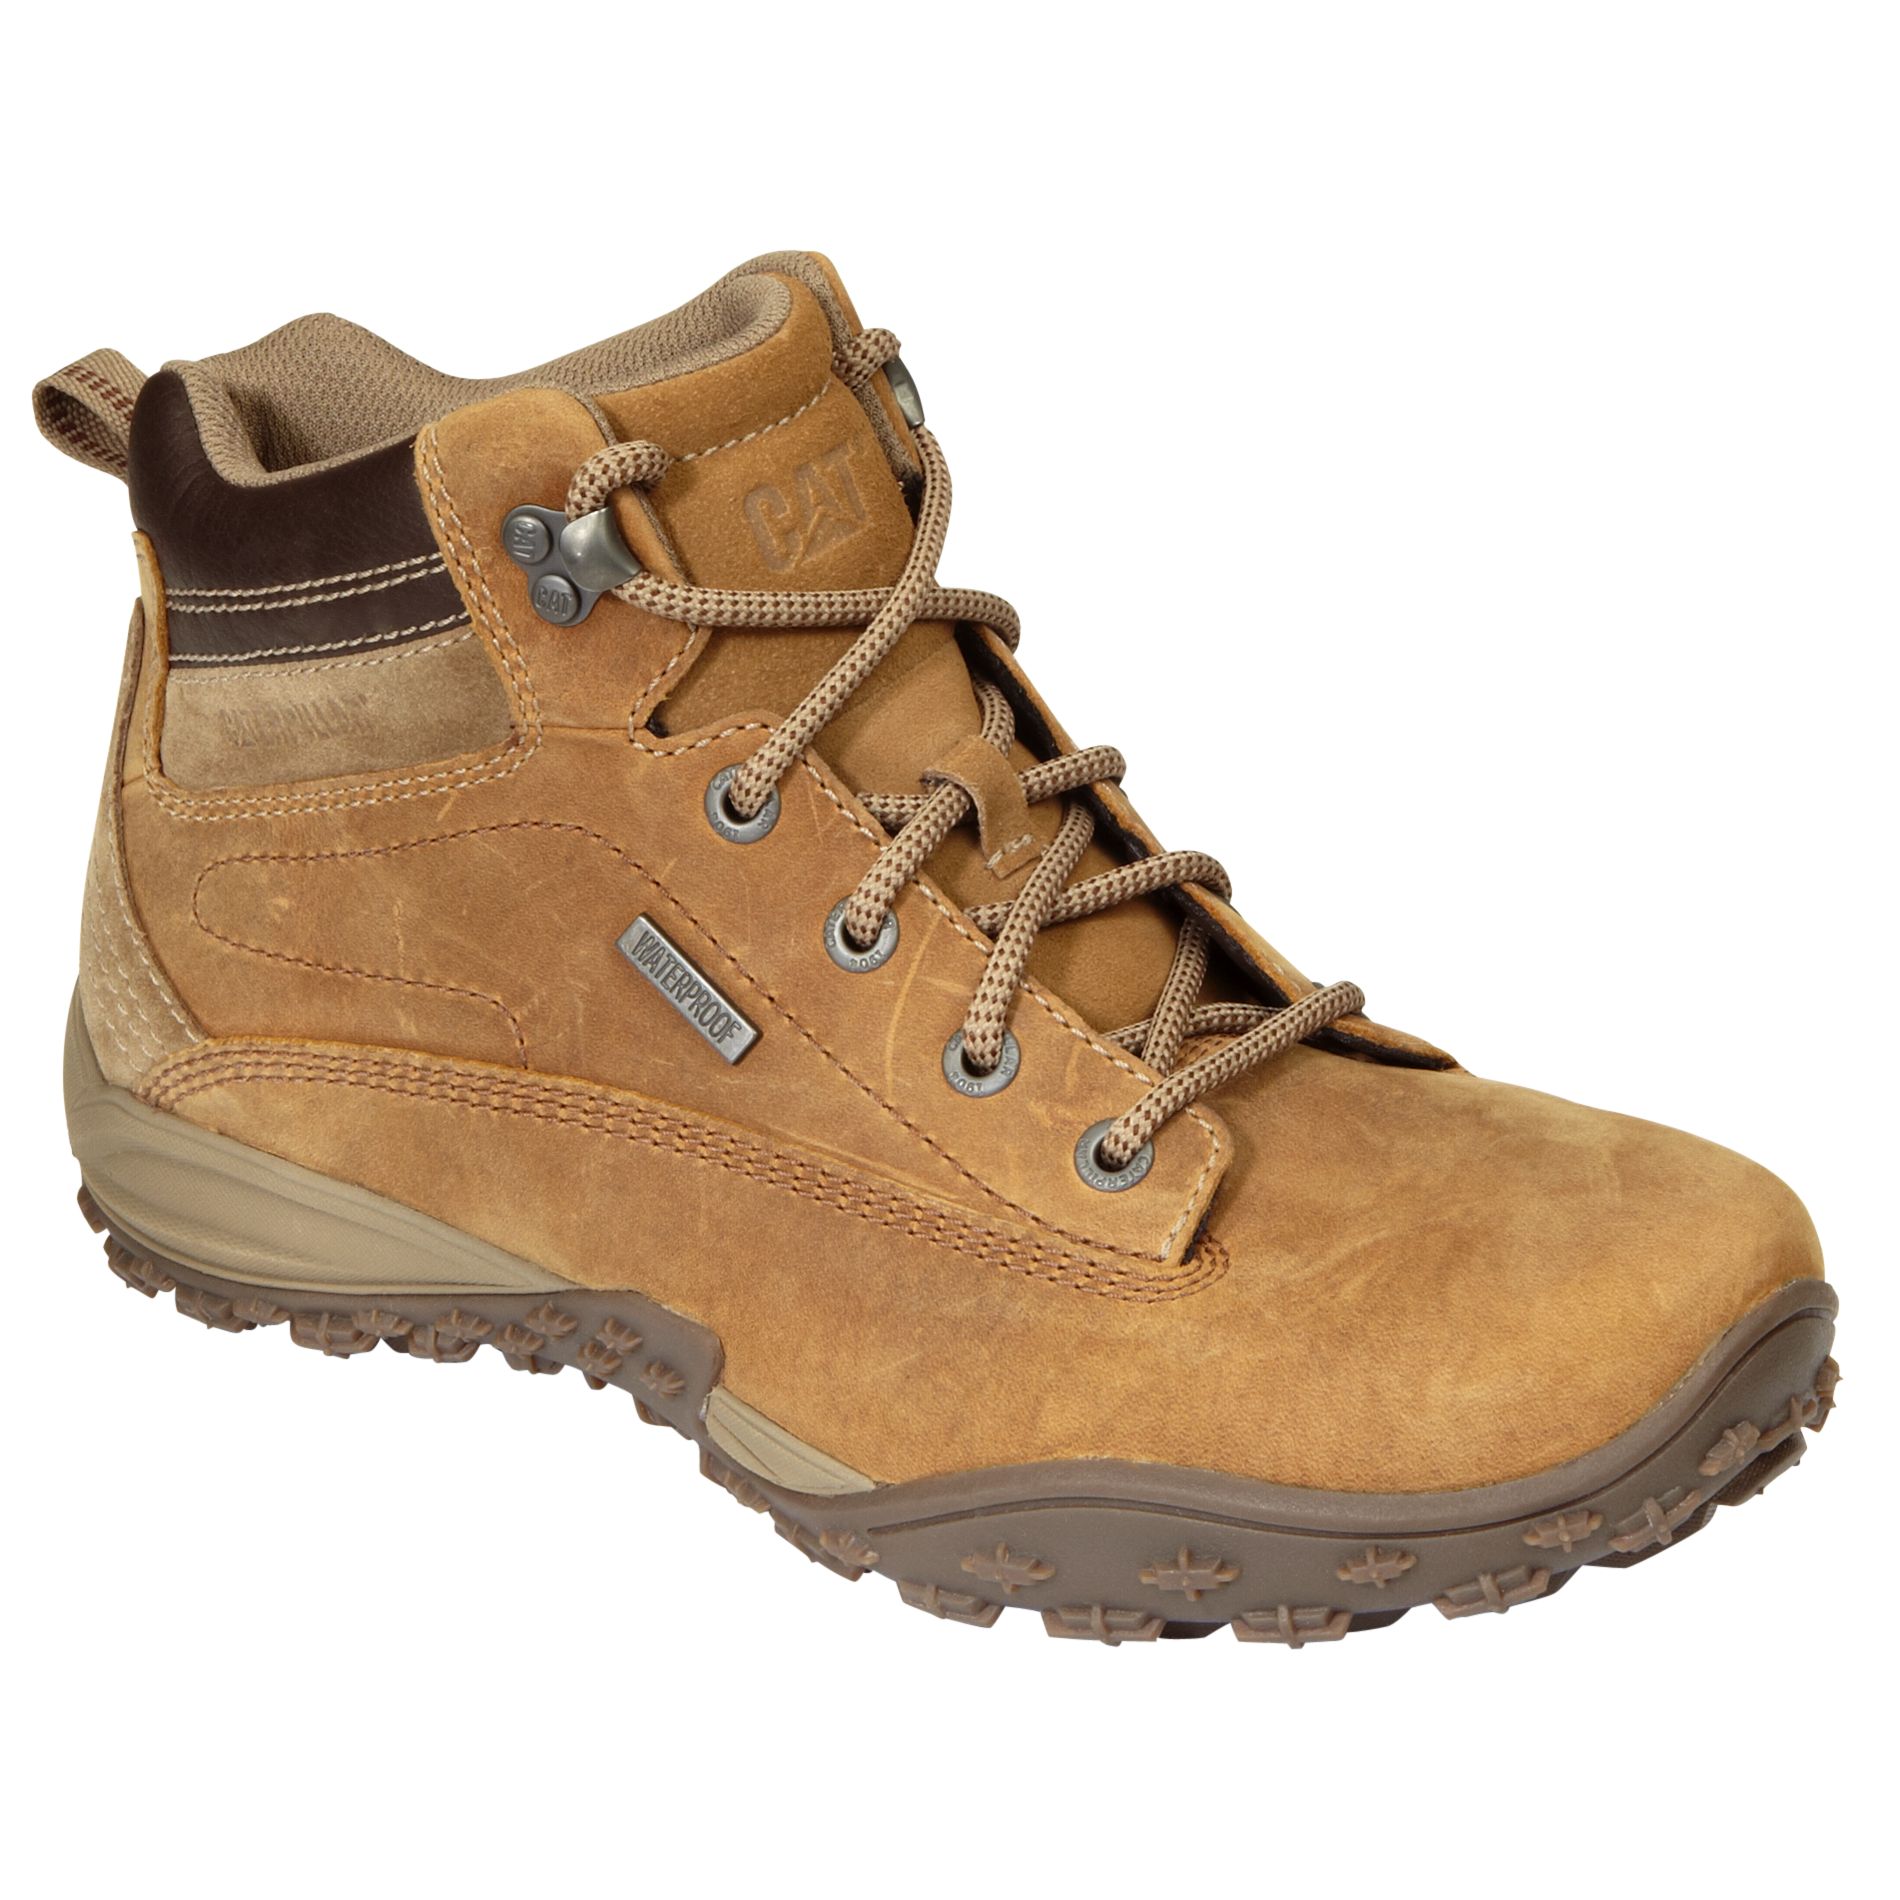 Best Leather Backpacking Boots | IQS Executive